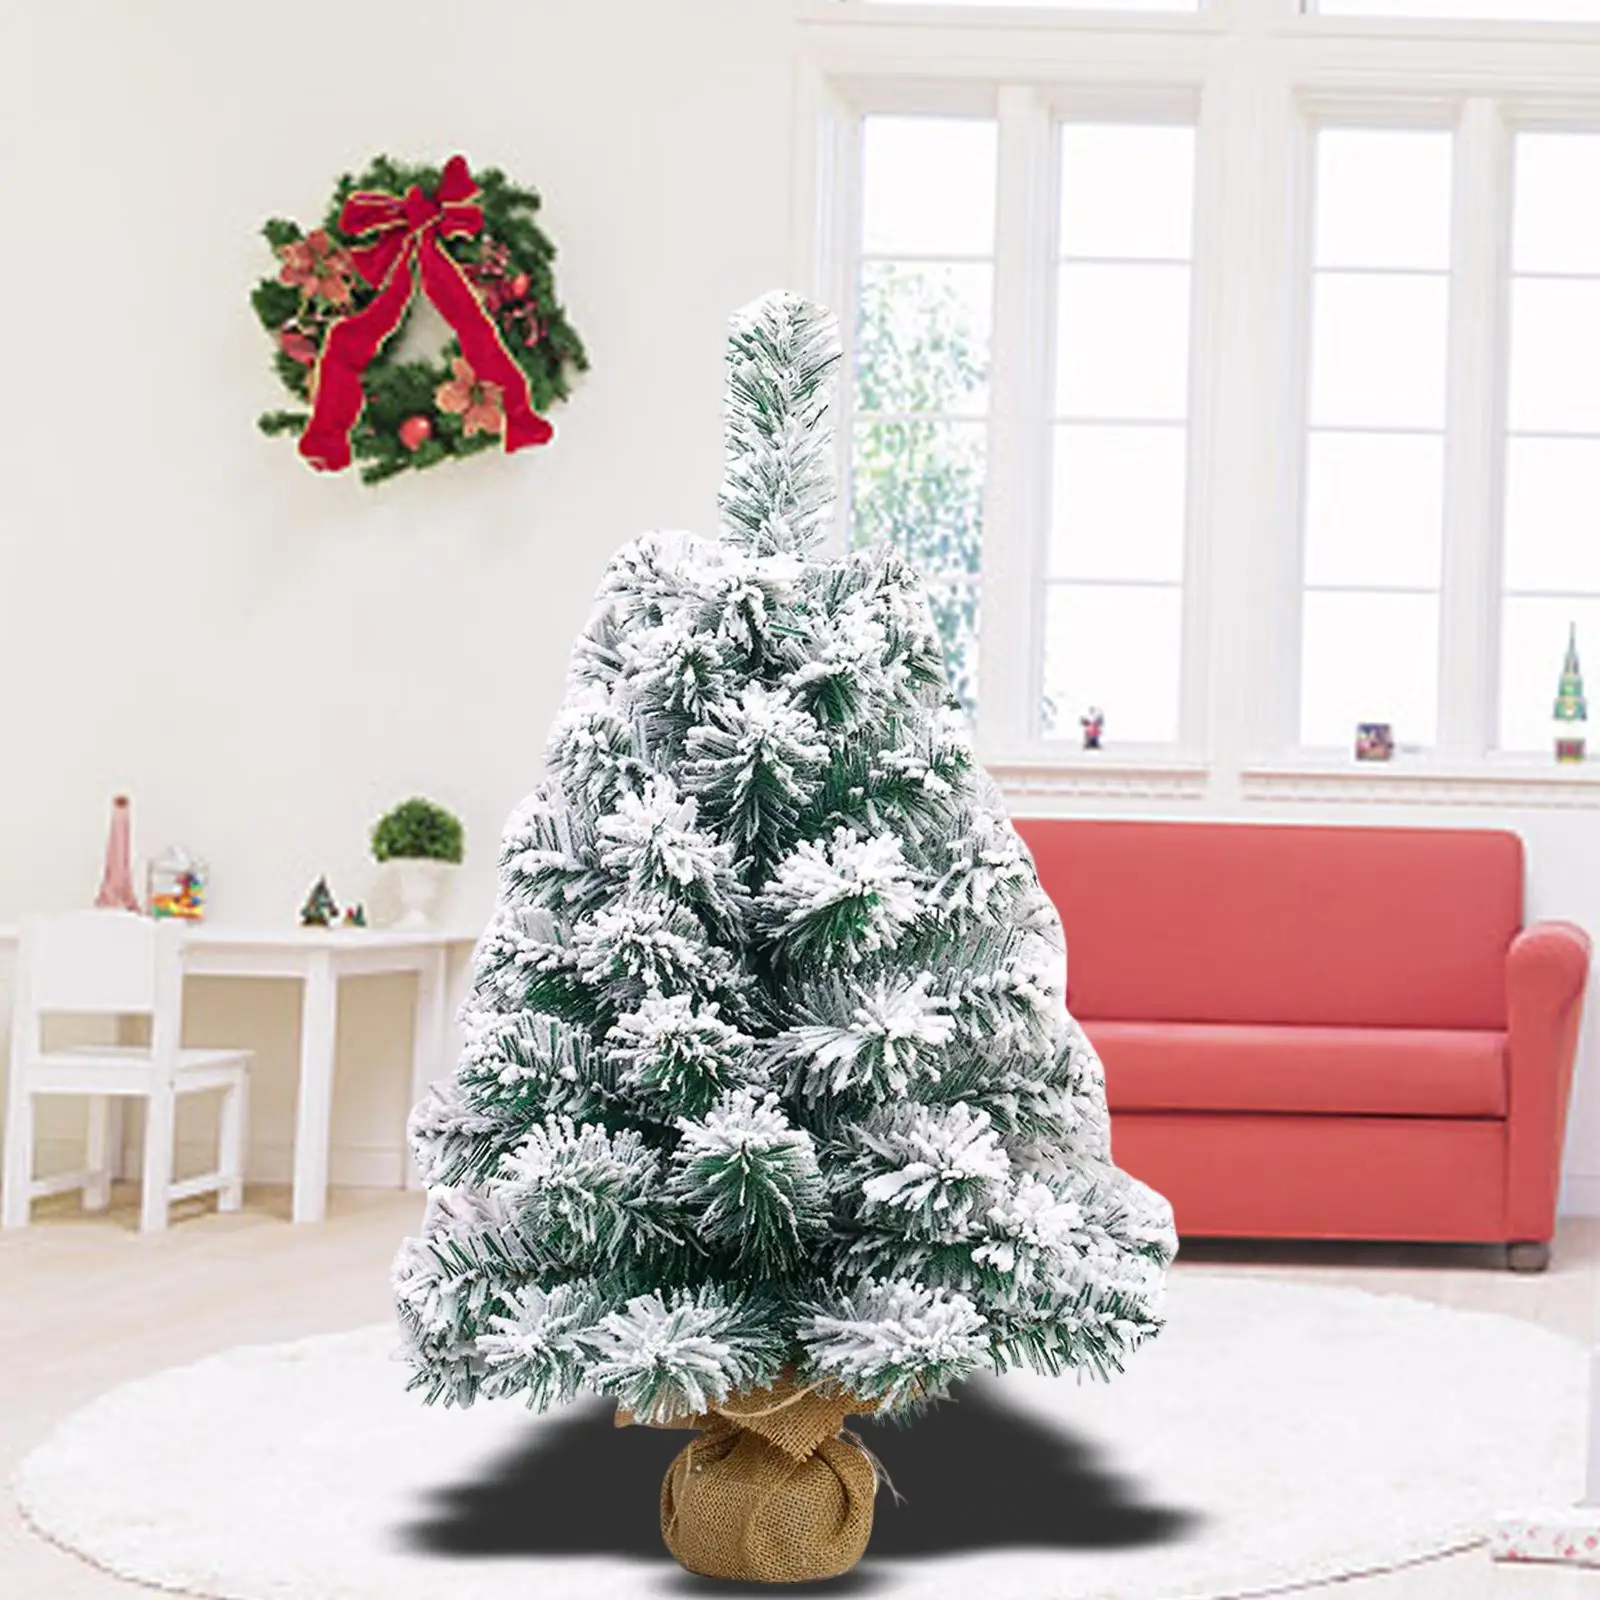 23inch Artificial Mini Christmas Tree Includes Cloth Bag Artificial Xmas Tree for Office Tabletop Home Decoration